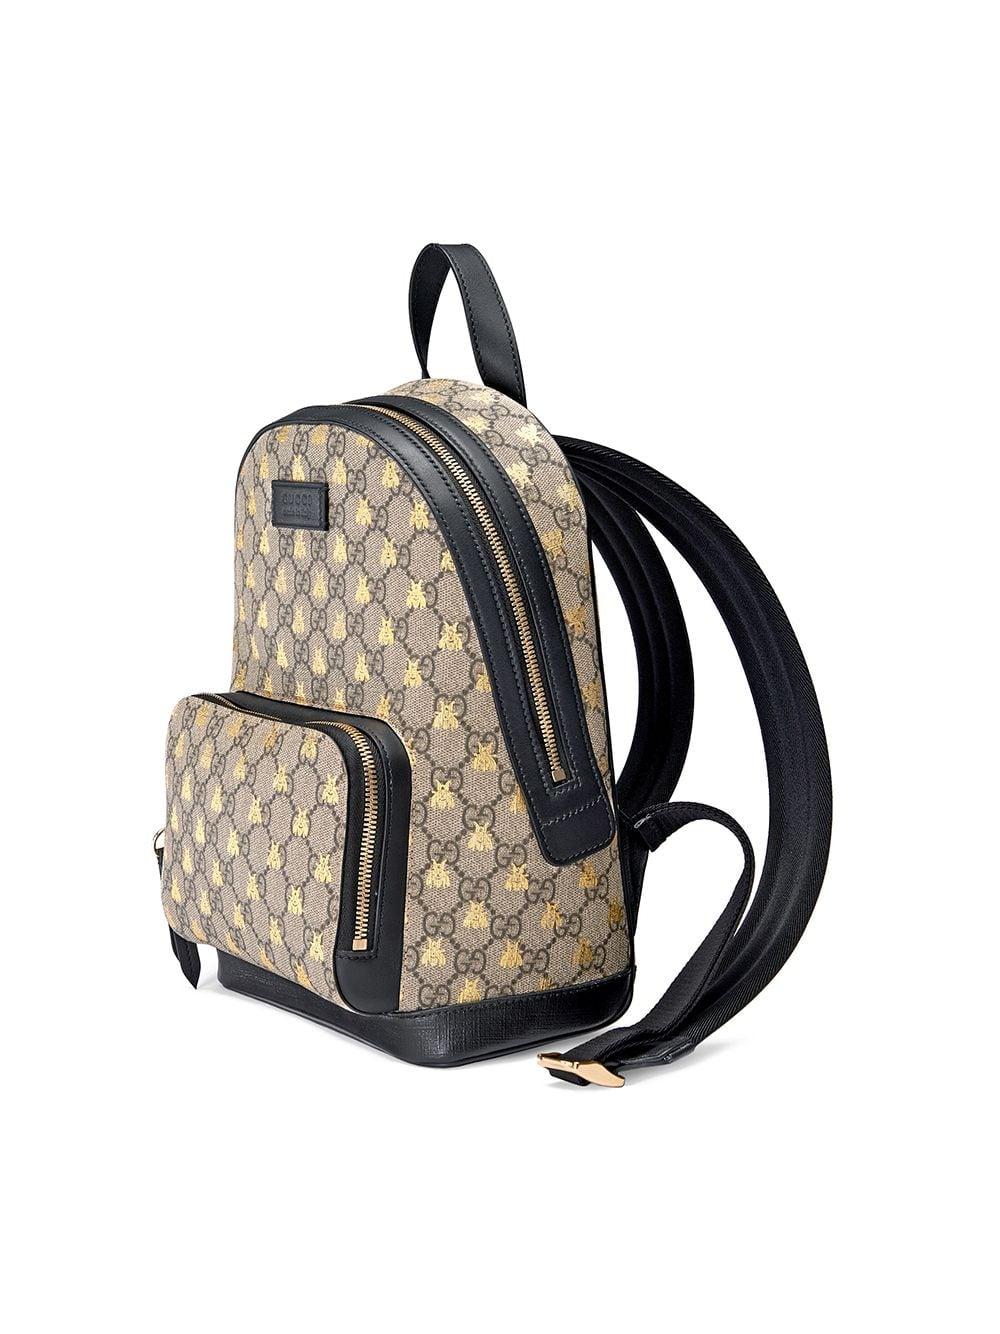 Gucci Gg Supreme Bees Backpack | Lyst